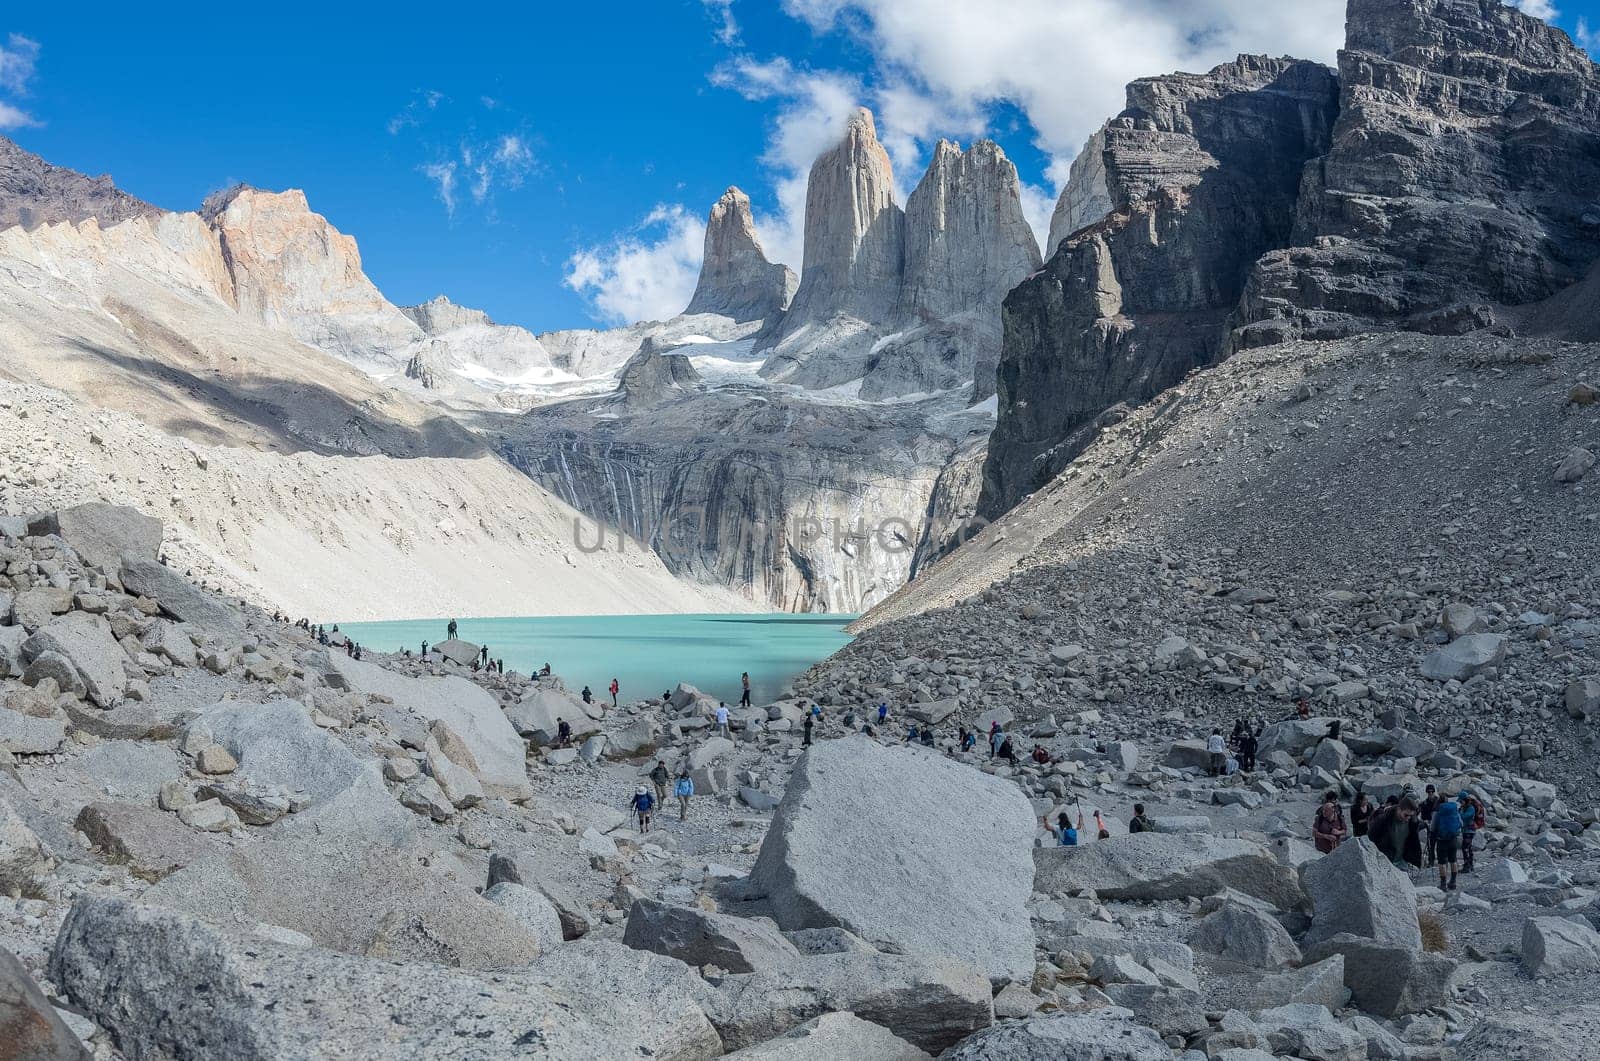 Travelers hike rugged paths to a breathtaking icy lake amid towering peaks.